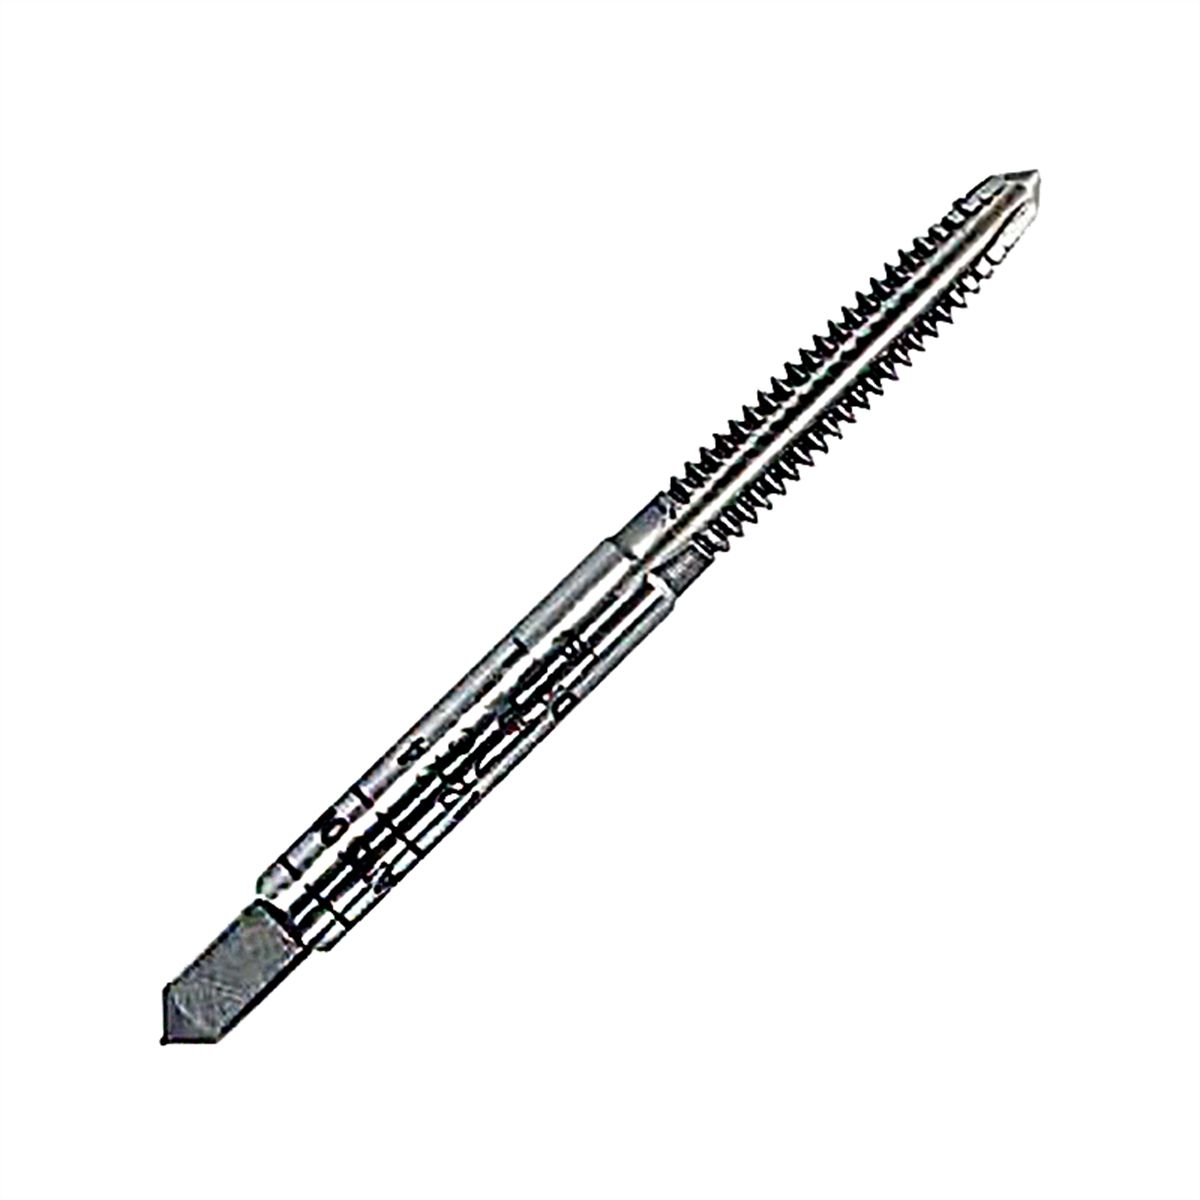 Cut Thread Fractional Plug Tap - 9/16In 12 NC Carded